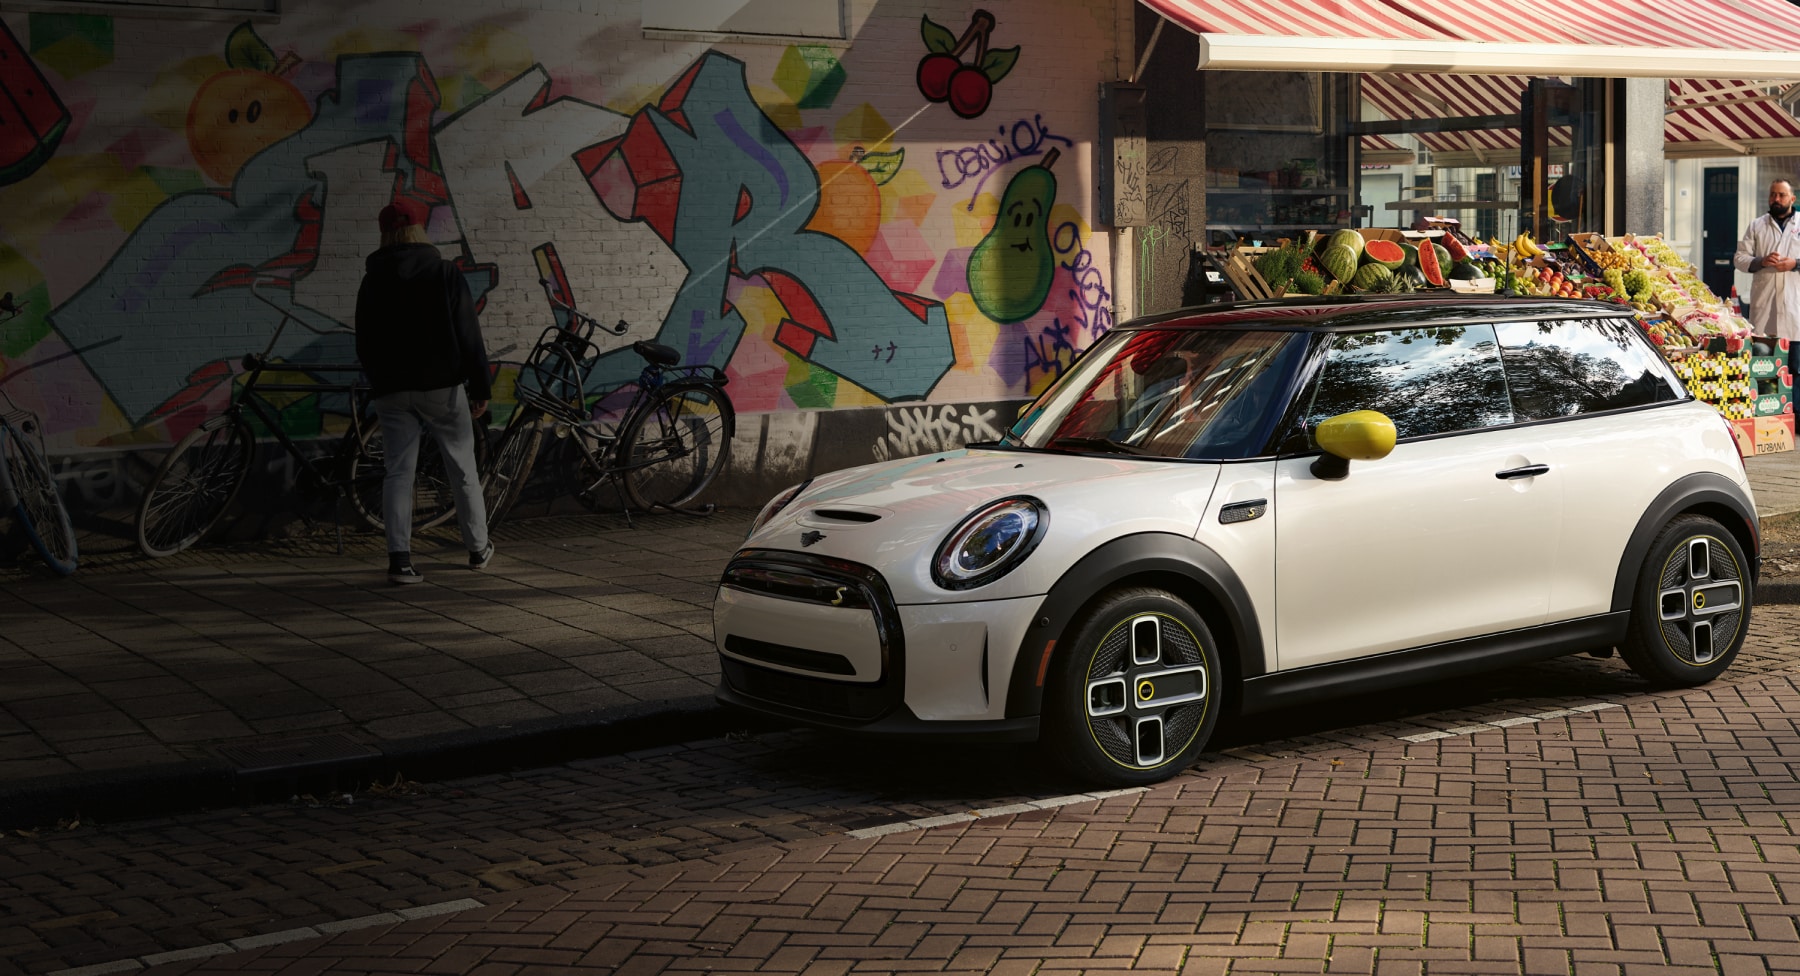 Three-quarters front view of a white MINI Cooper SE Hardtop 2 Door parked on a street in an urban setting with a graffiti wall and retail storefront in the background.